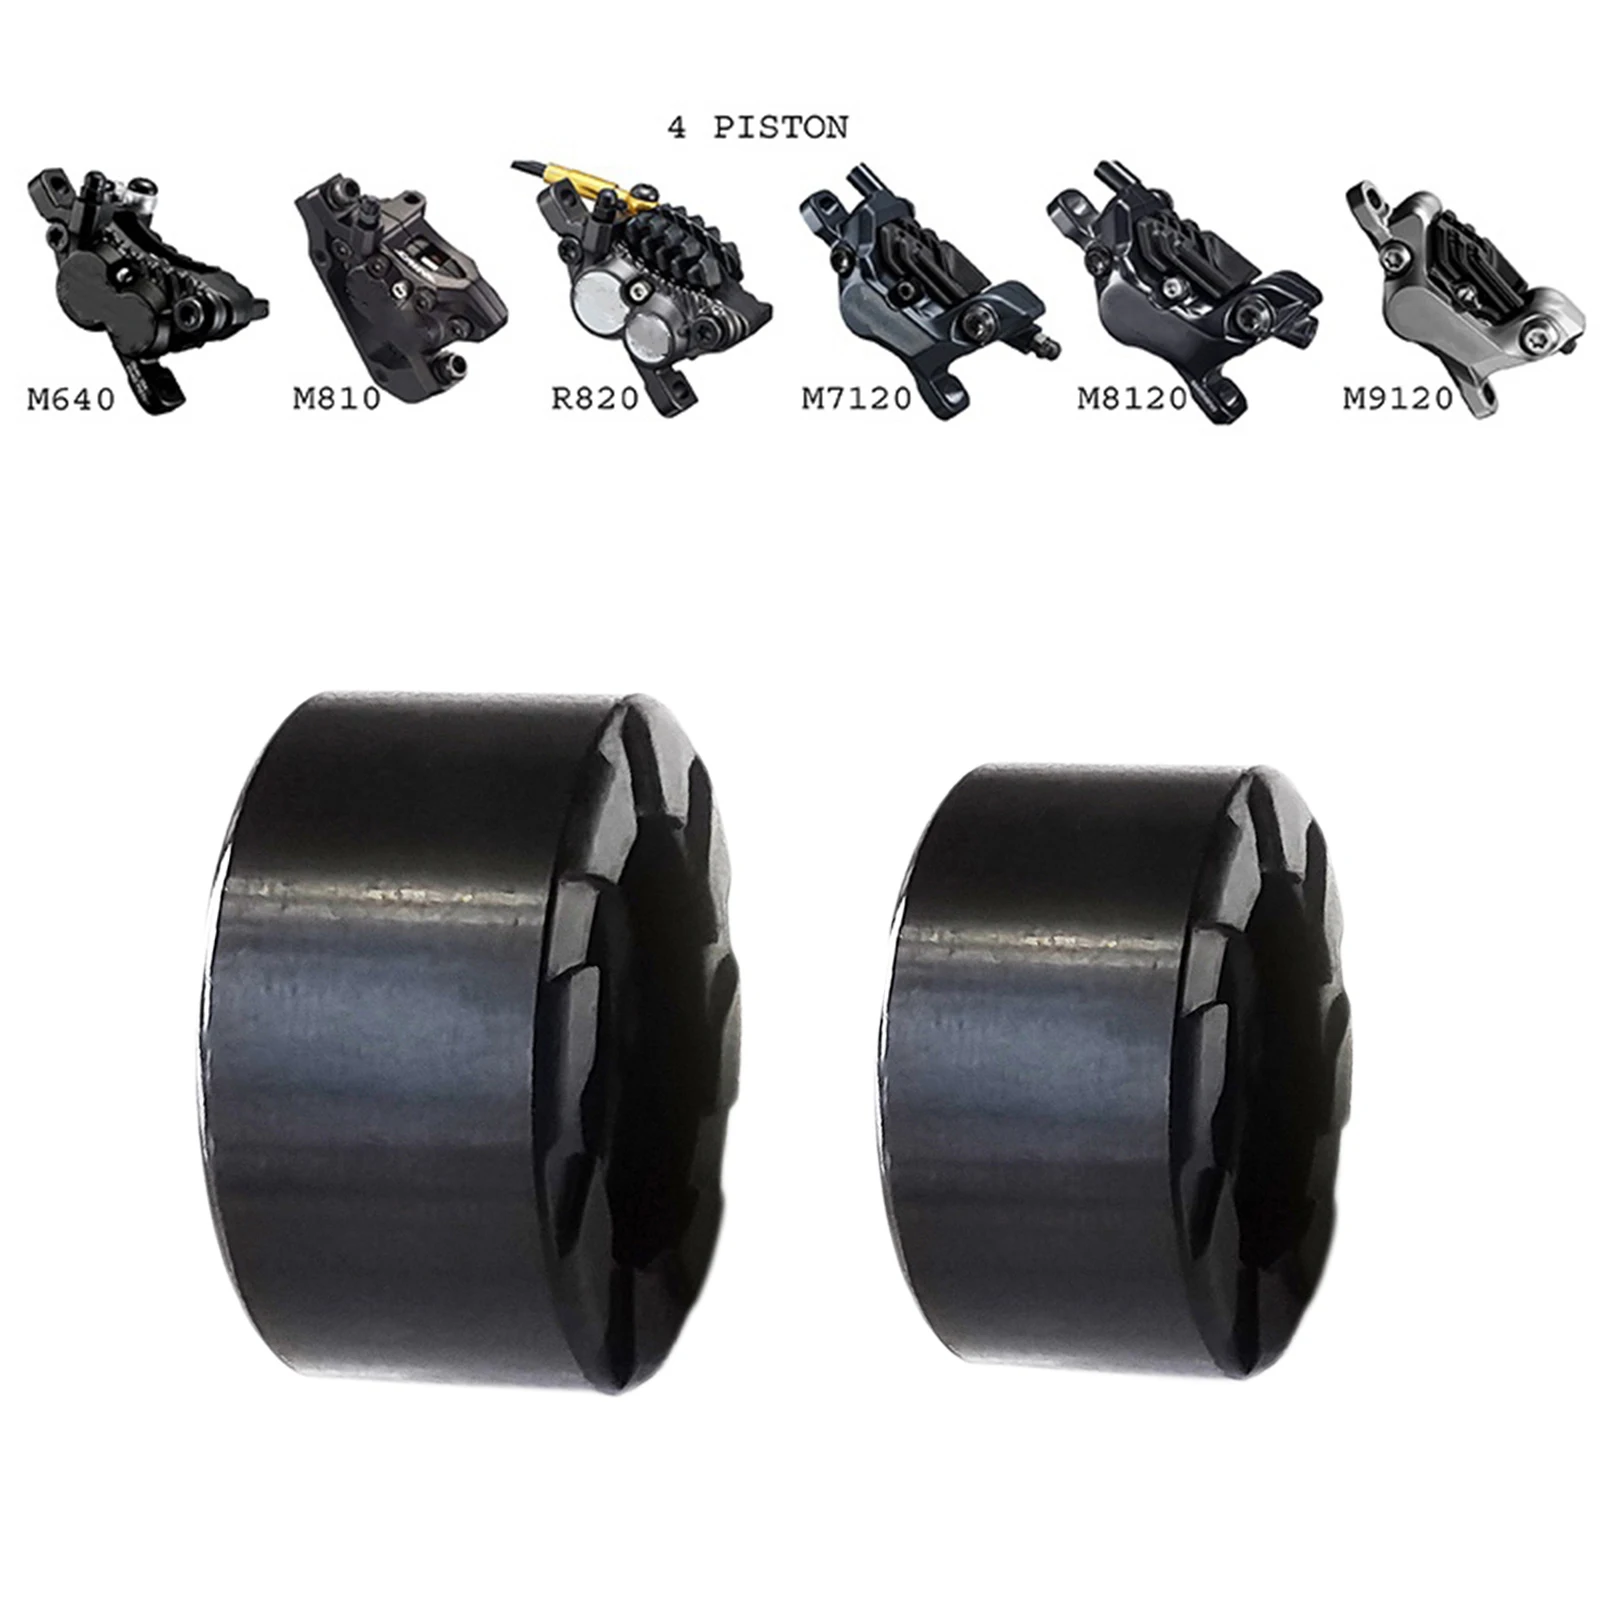 Brake Caliper Piston Replacement Road MTB Bicycle Hydraulic Disc Brake Parts Accessories Fits for Shimano 17.2/15.1mm Pistons